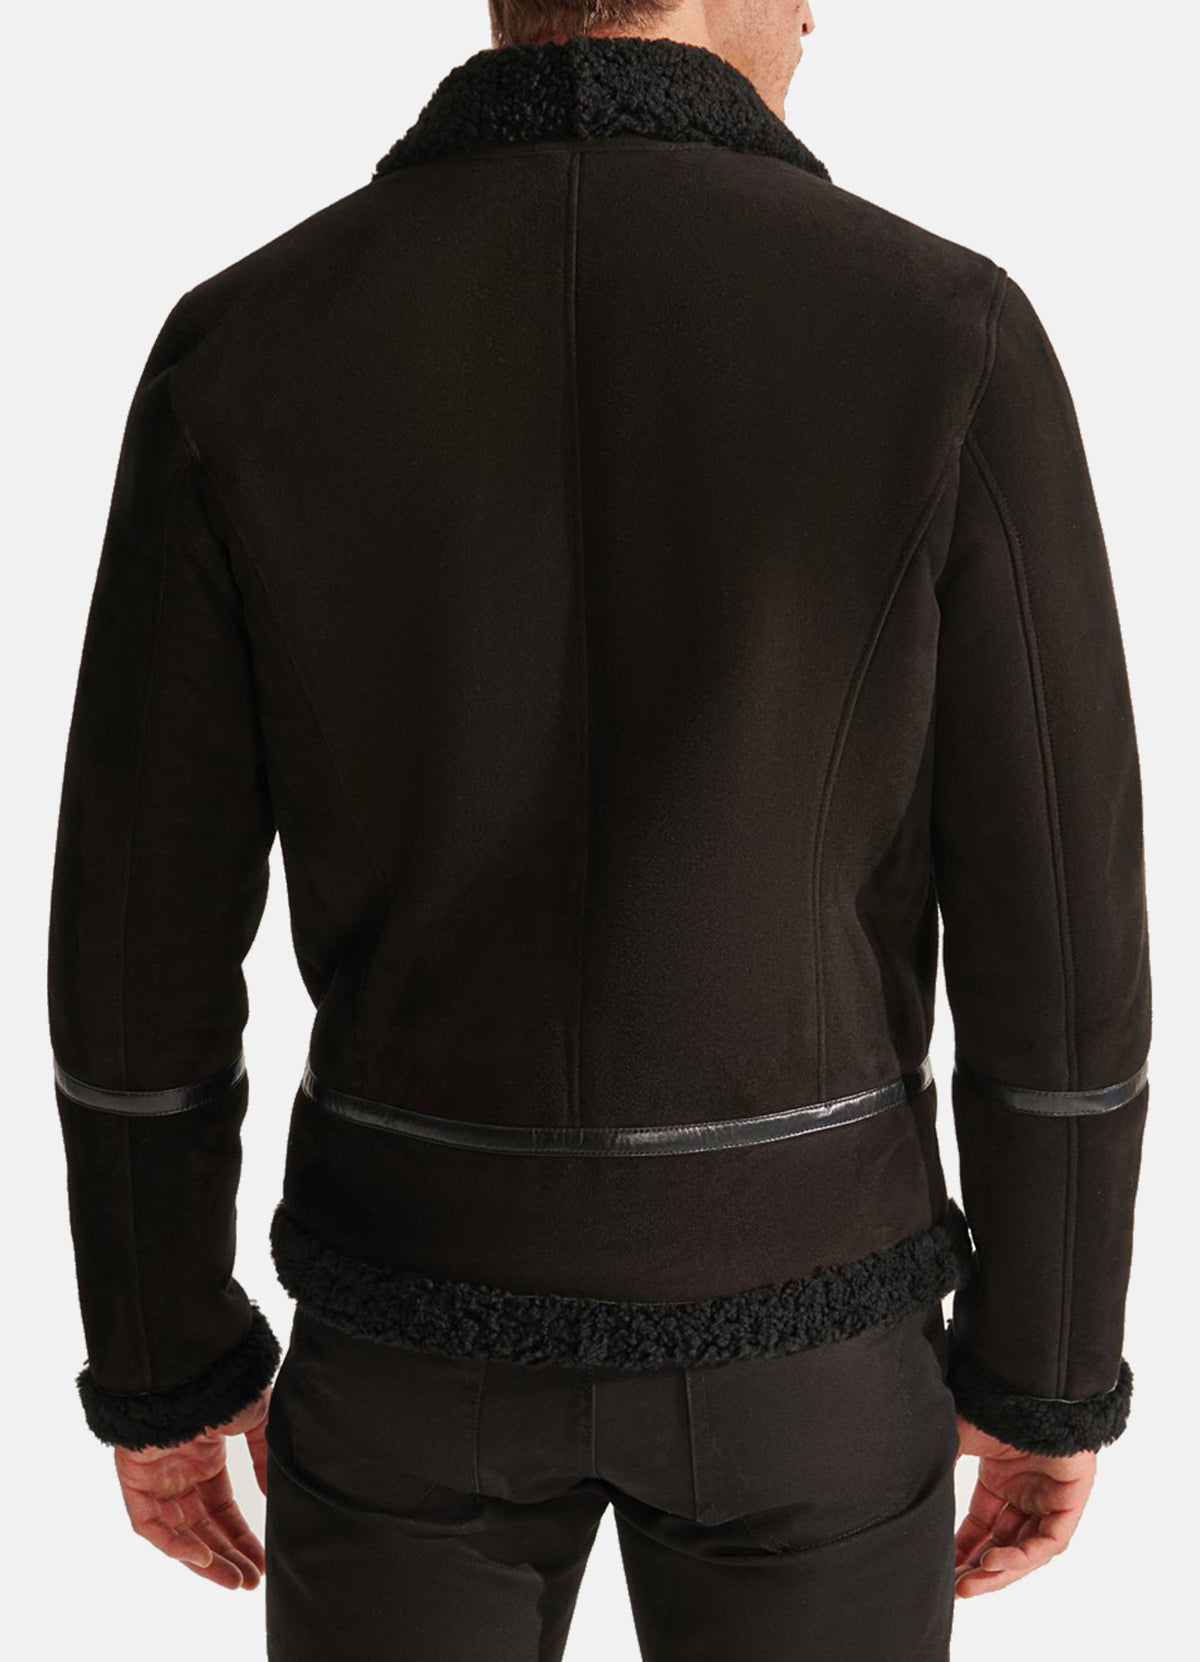 Mens Midnight Black Suede Shearling Leather Jacket